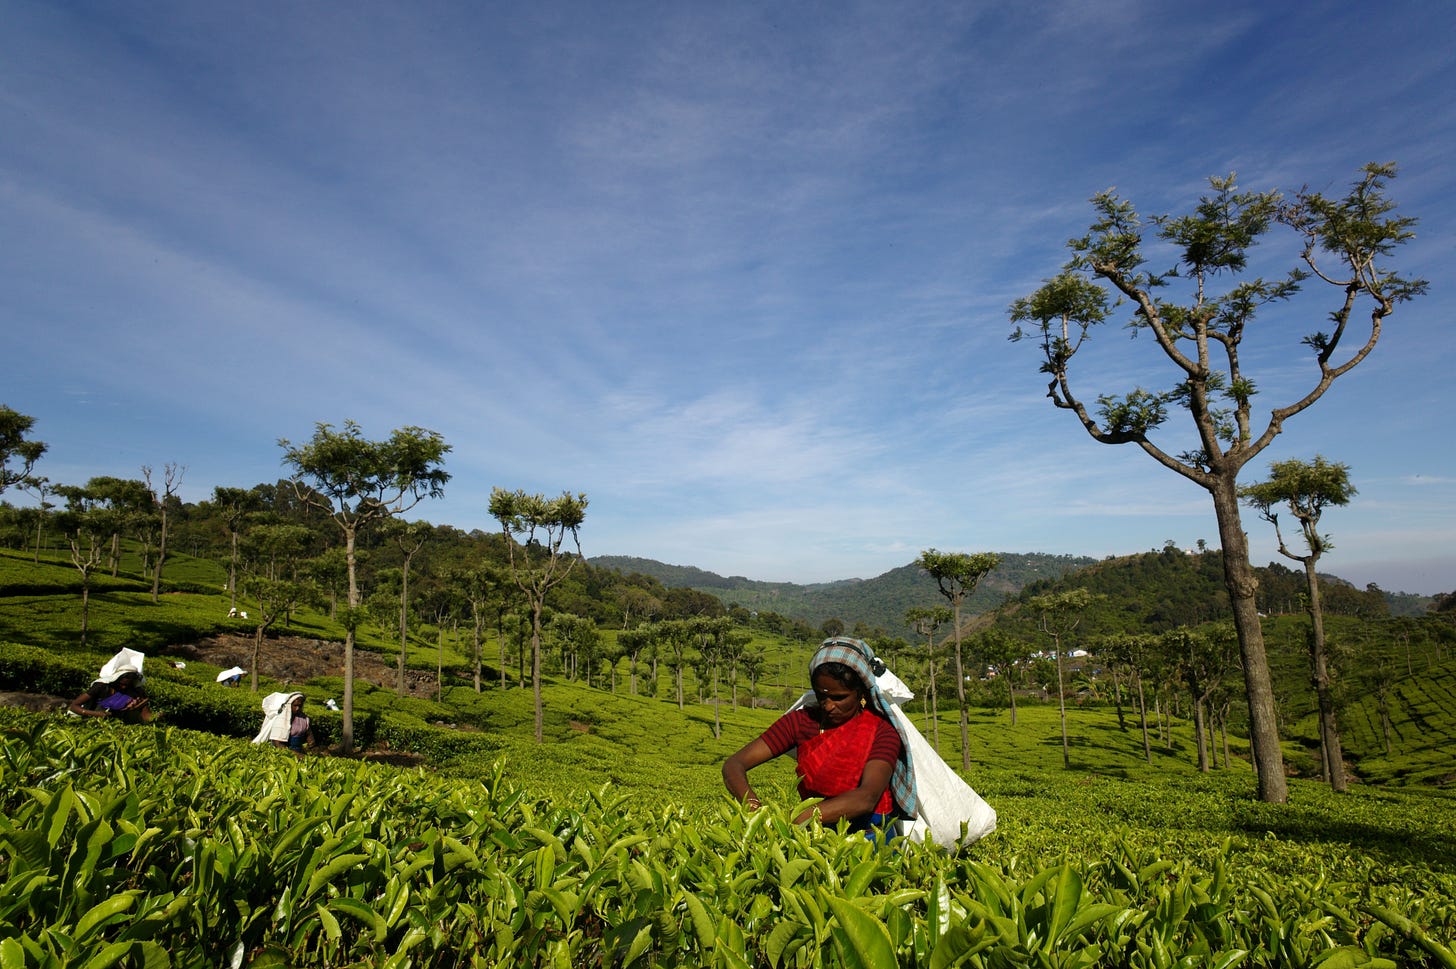 Woman picking tea in an open plain with tall trees in India under a clear blue sky